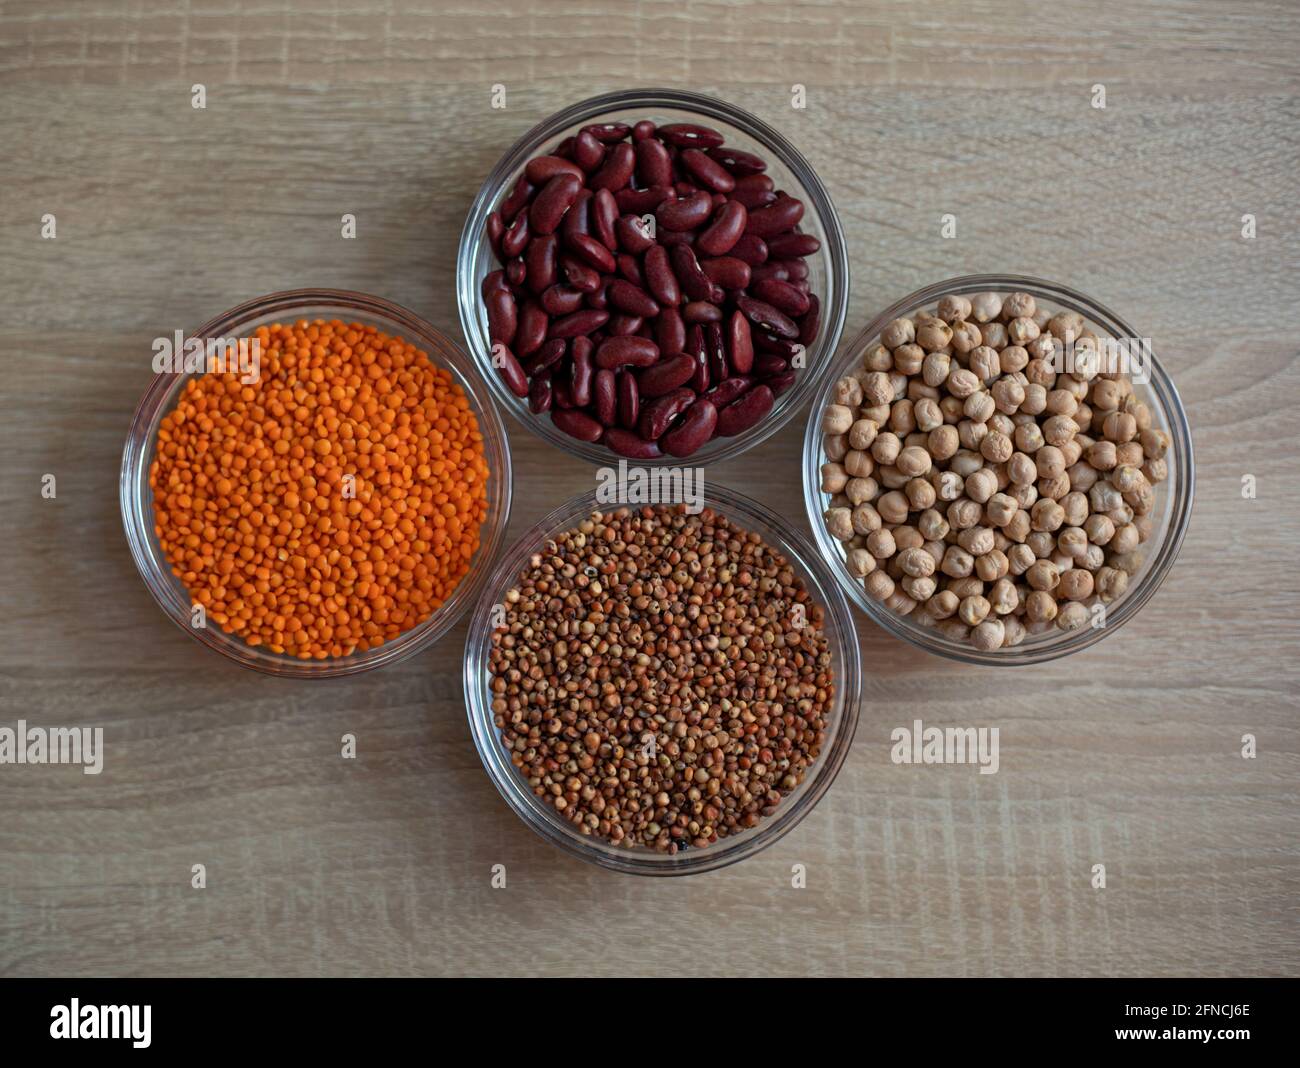 Bowls of cereal grains: chickpeas, red lentils, red bean, sorghum grain Stock Photo